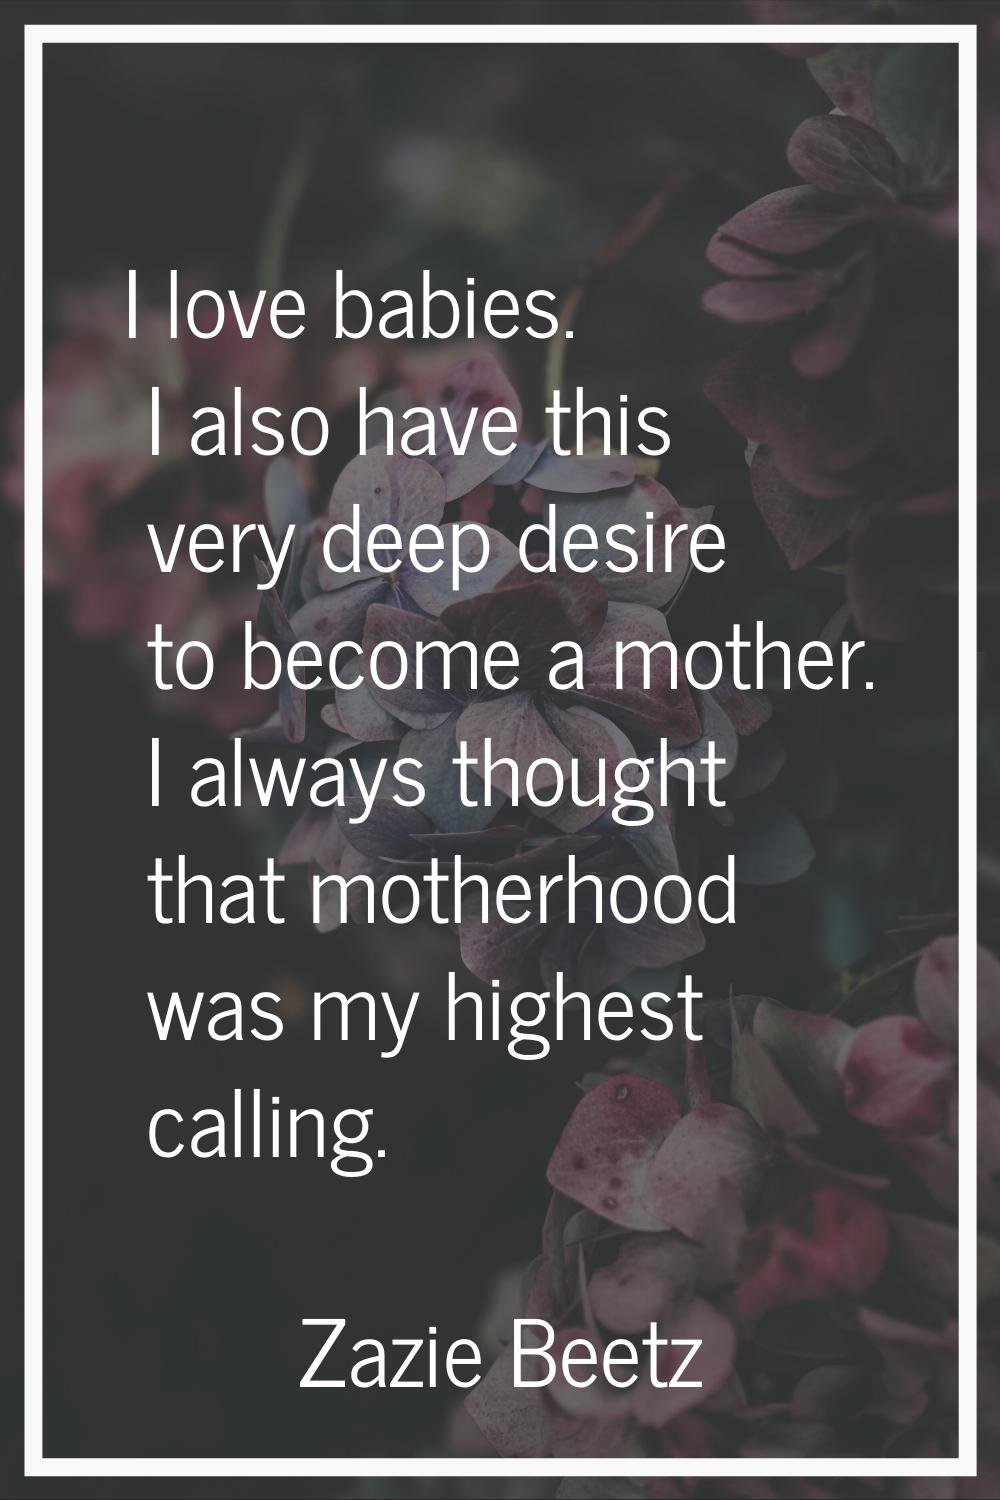 I love babies. I also have this very deep desire to become a mother. I always thought that motherho